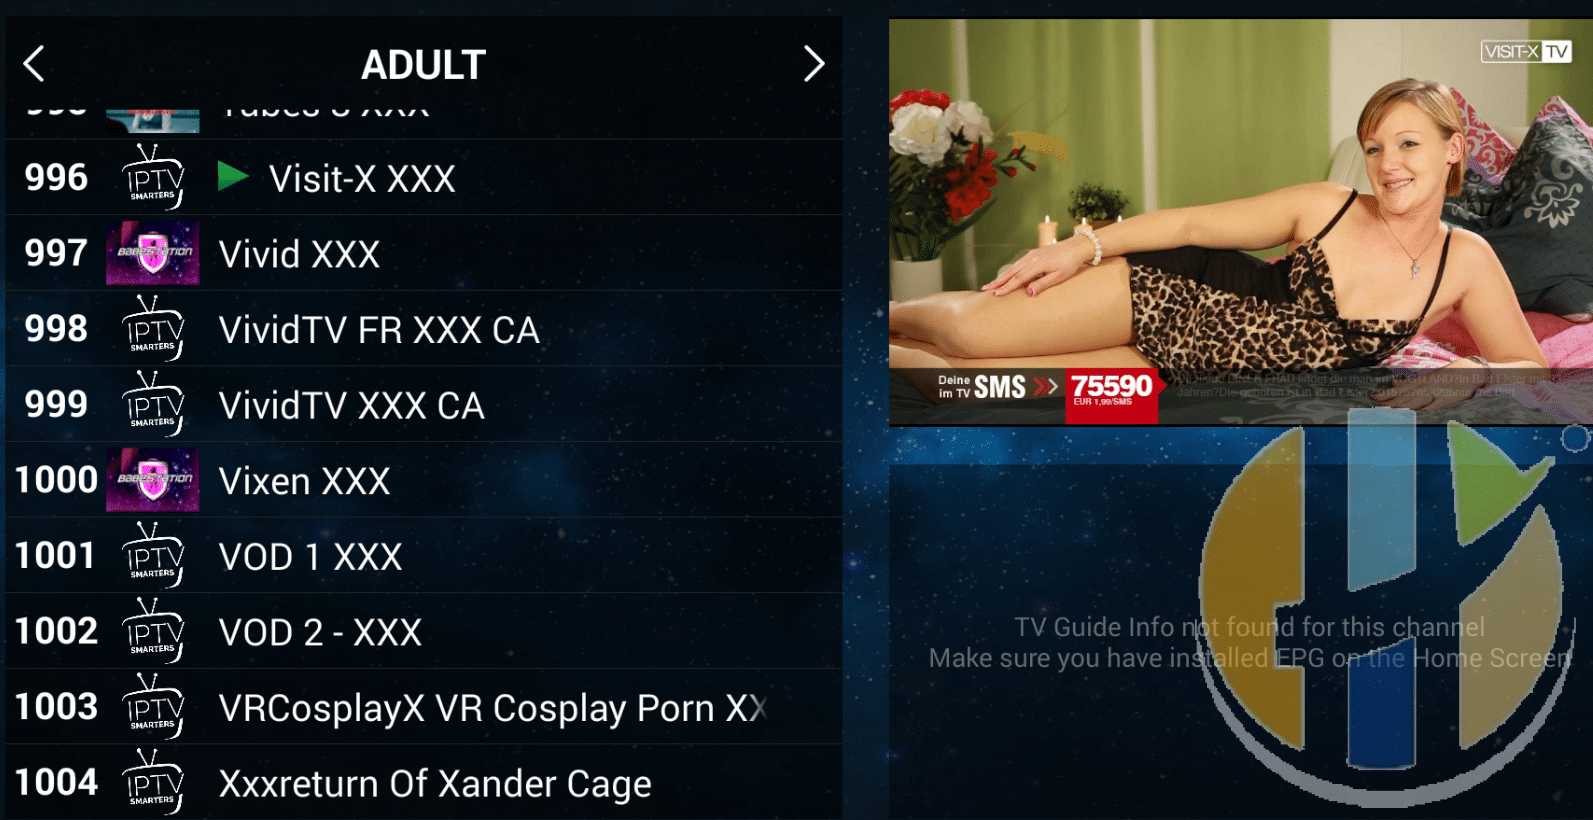 SuperFast streams IPTV Service also Include a range of Adult XXX Channels.